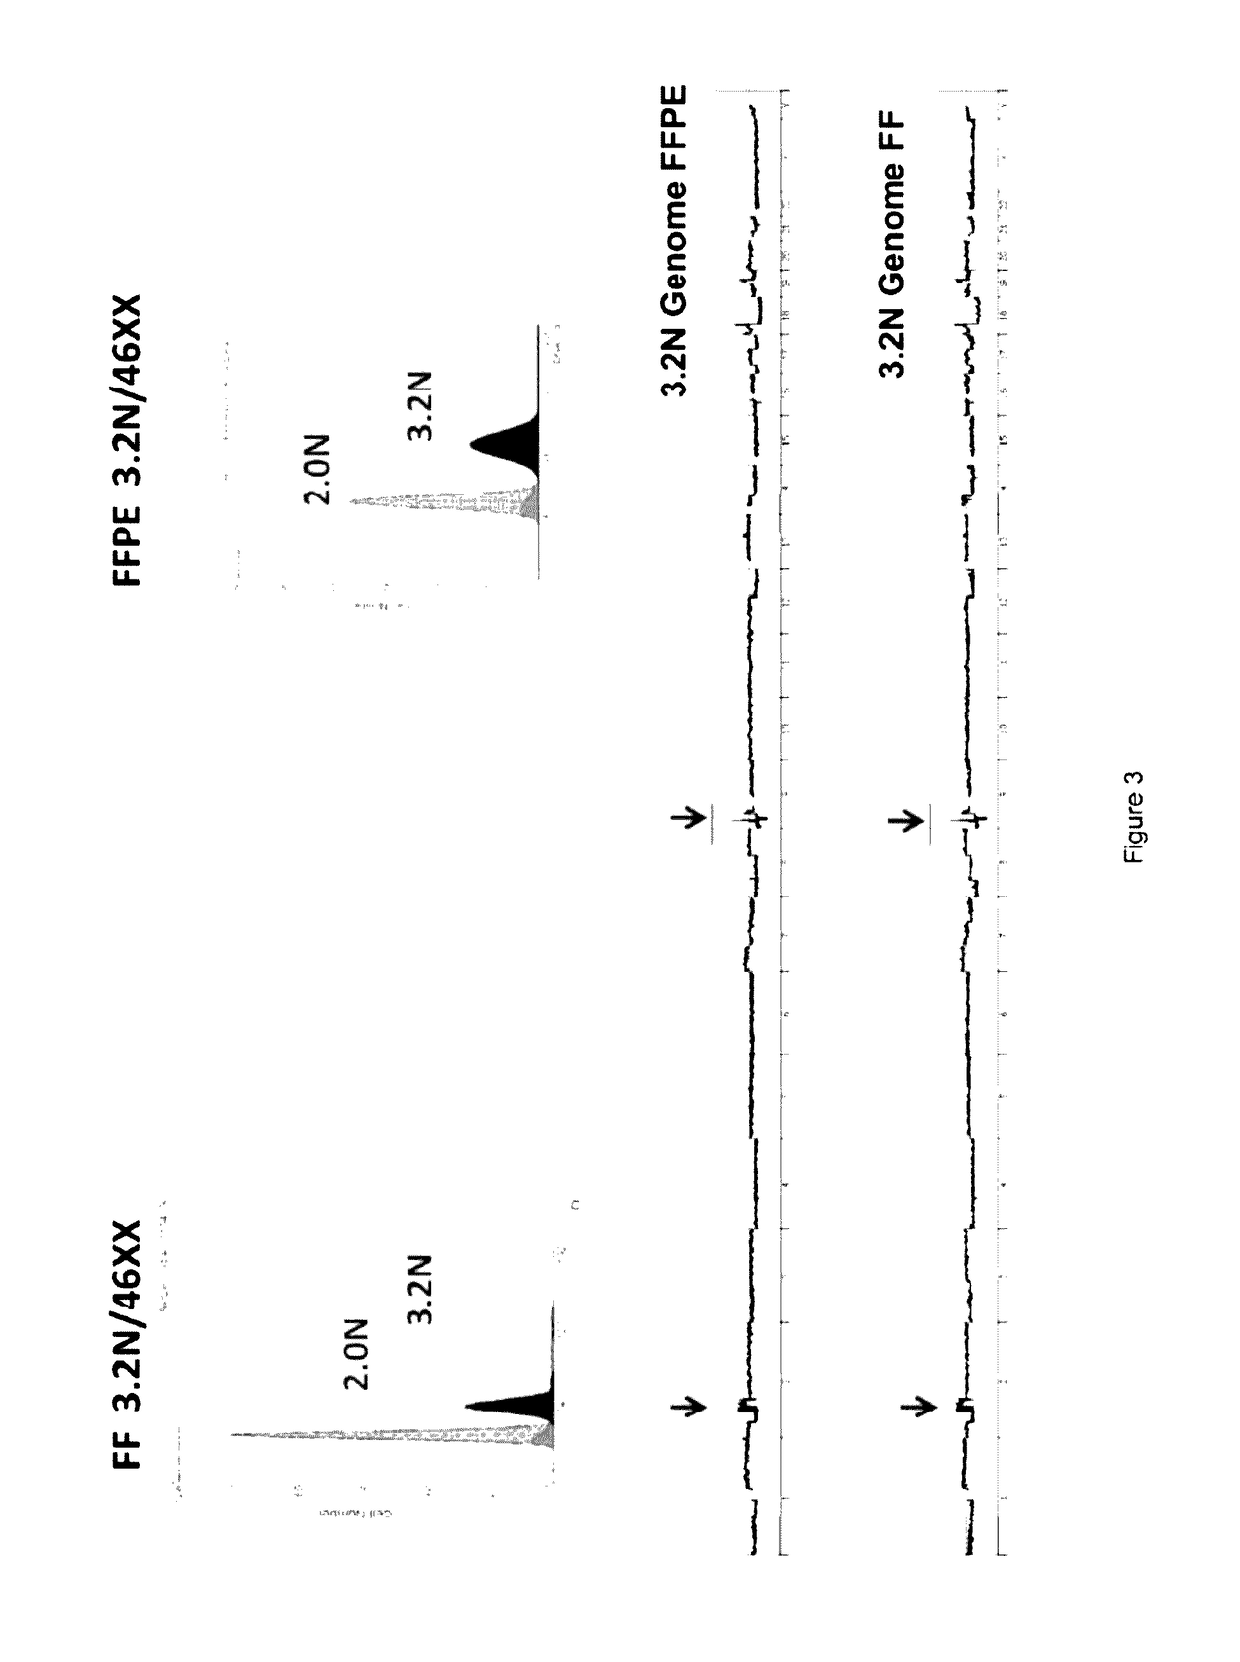 System and method of genomic profiling